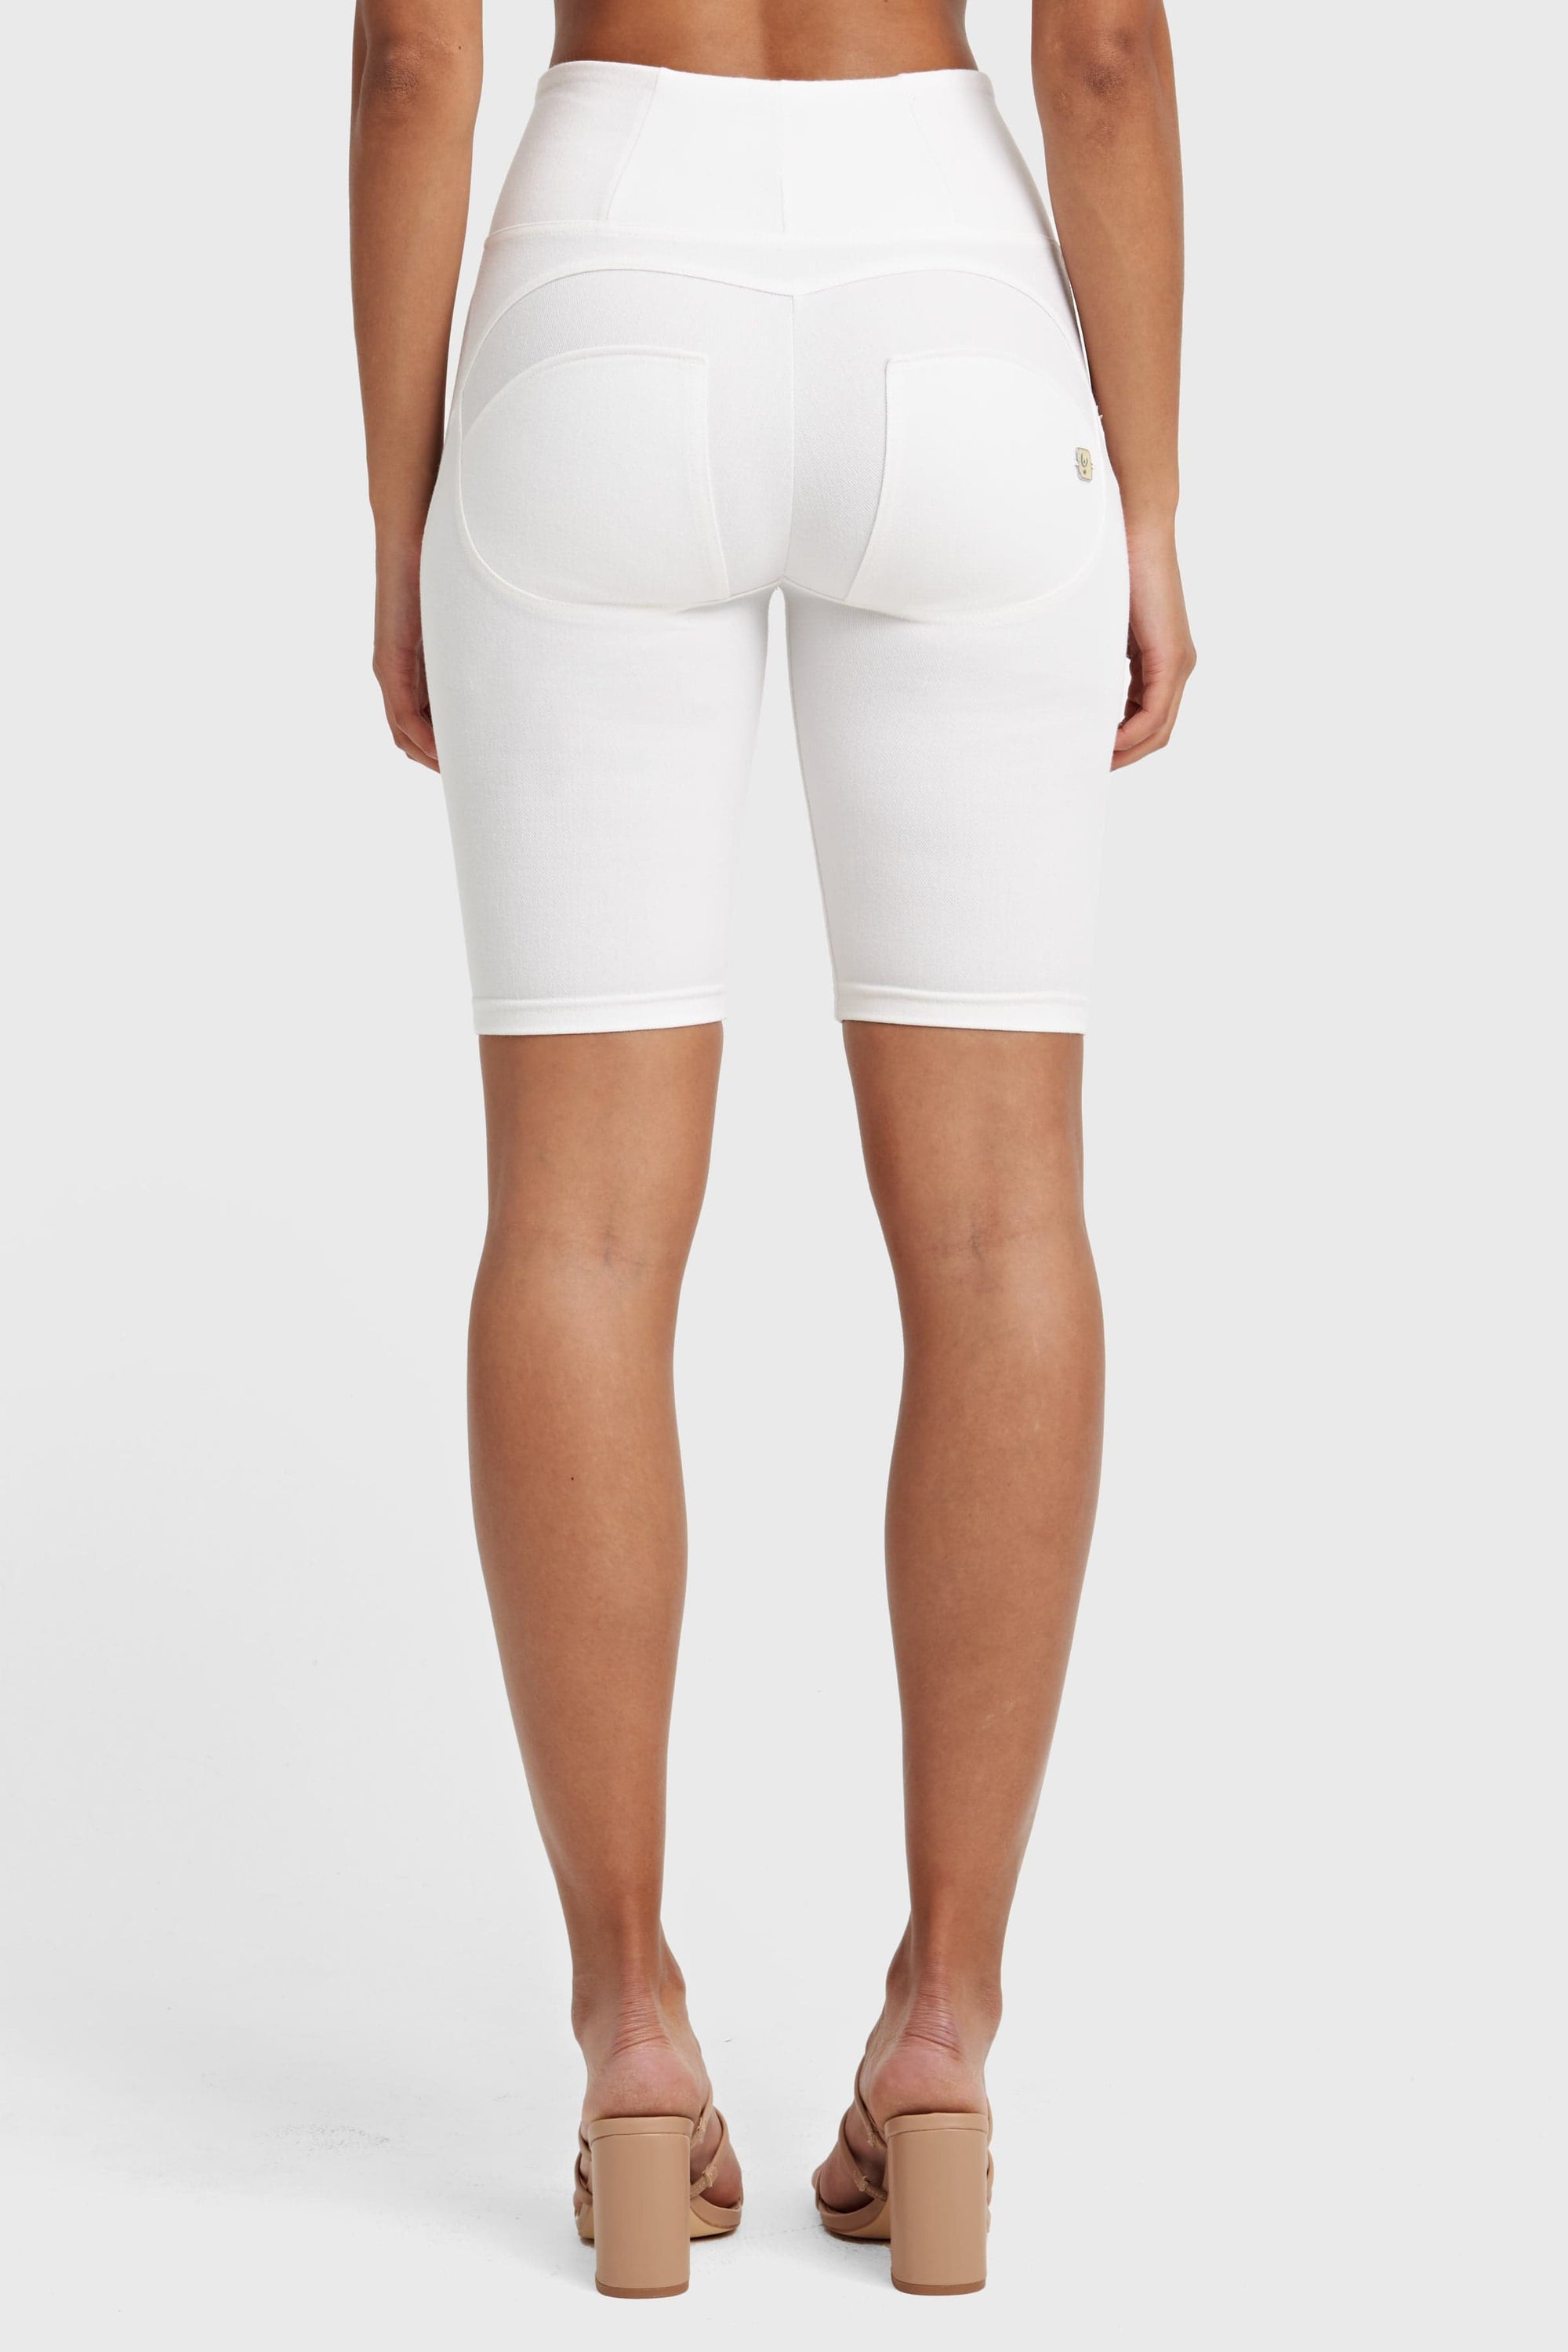 WR.UP® Drill Limited Edition - High Waisted - Biker Shorts - White 4